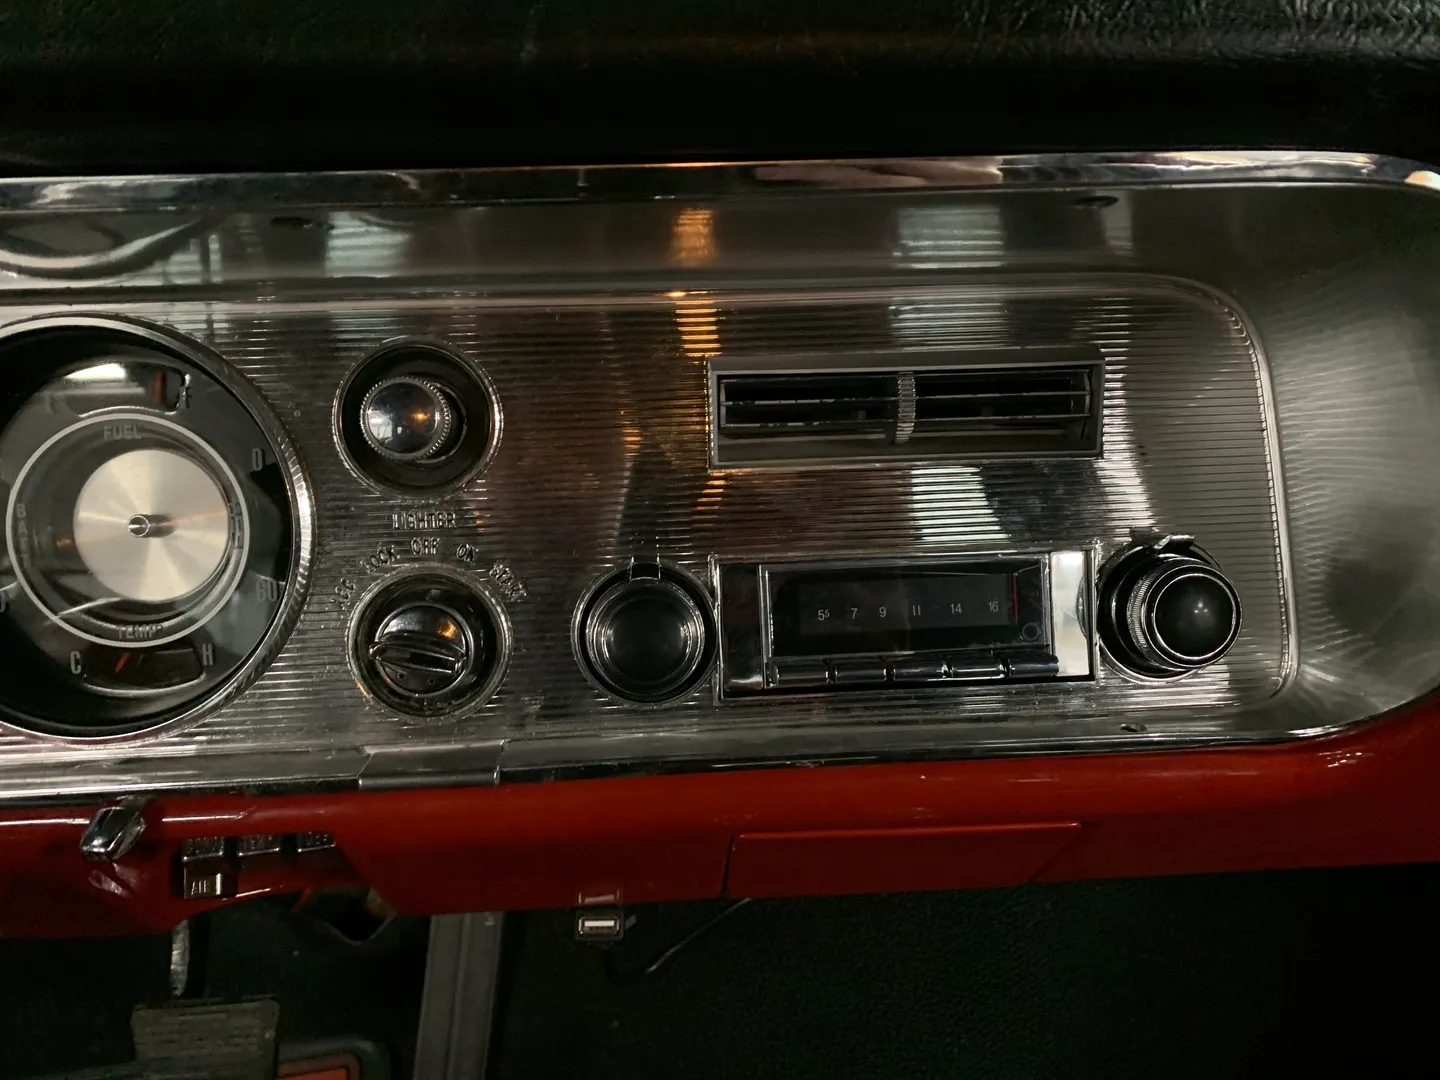 A silver stereo for a red vintage car